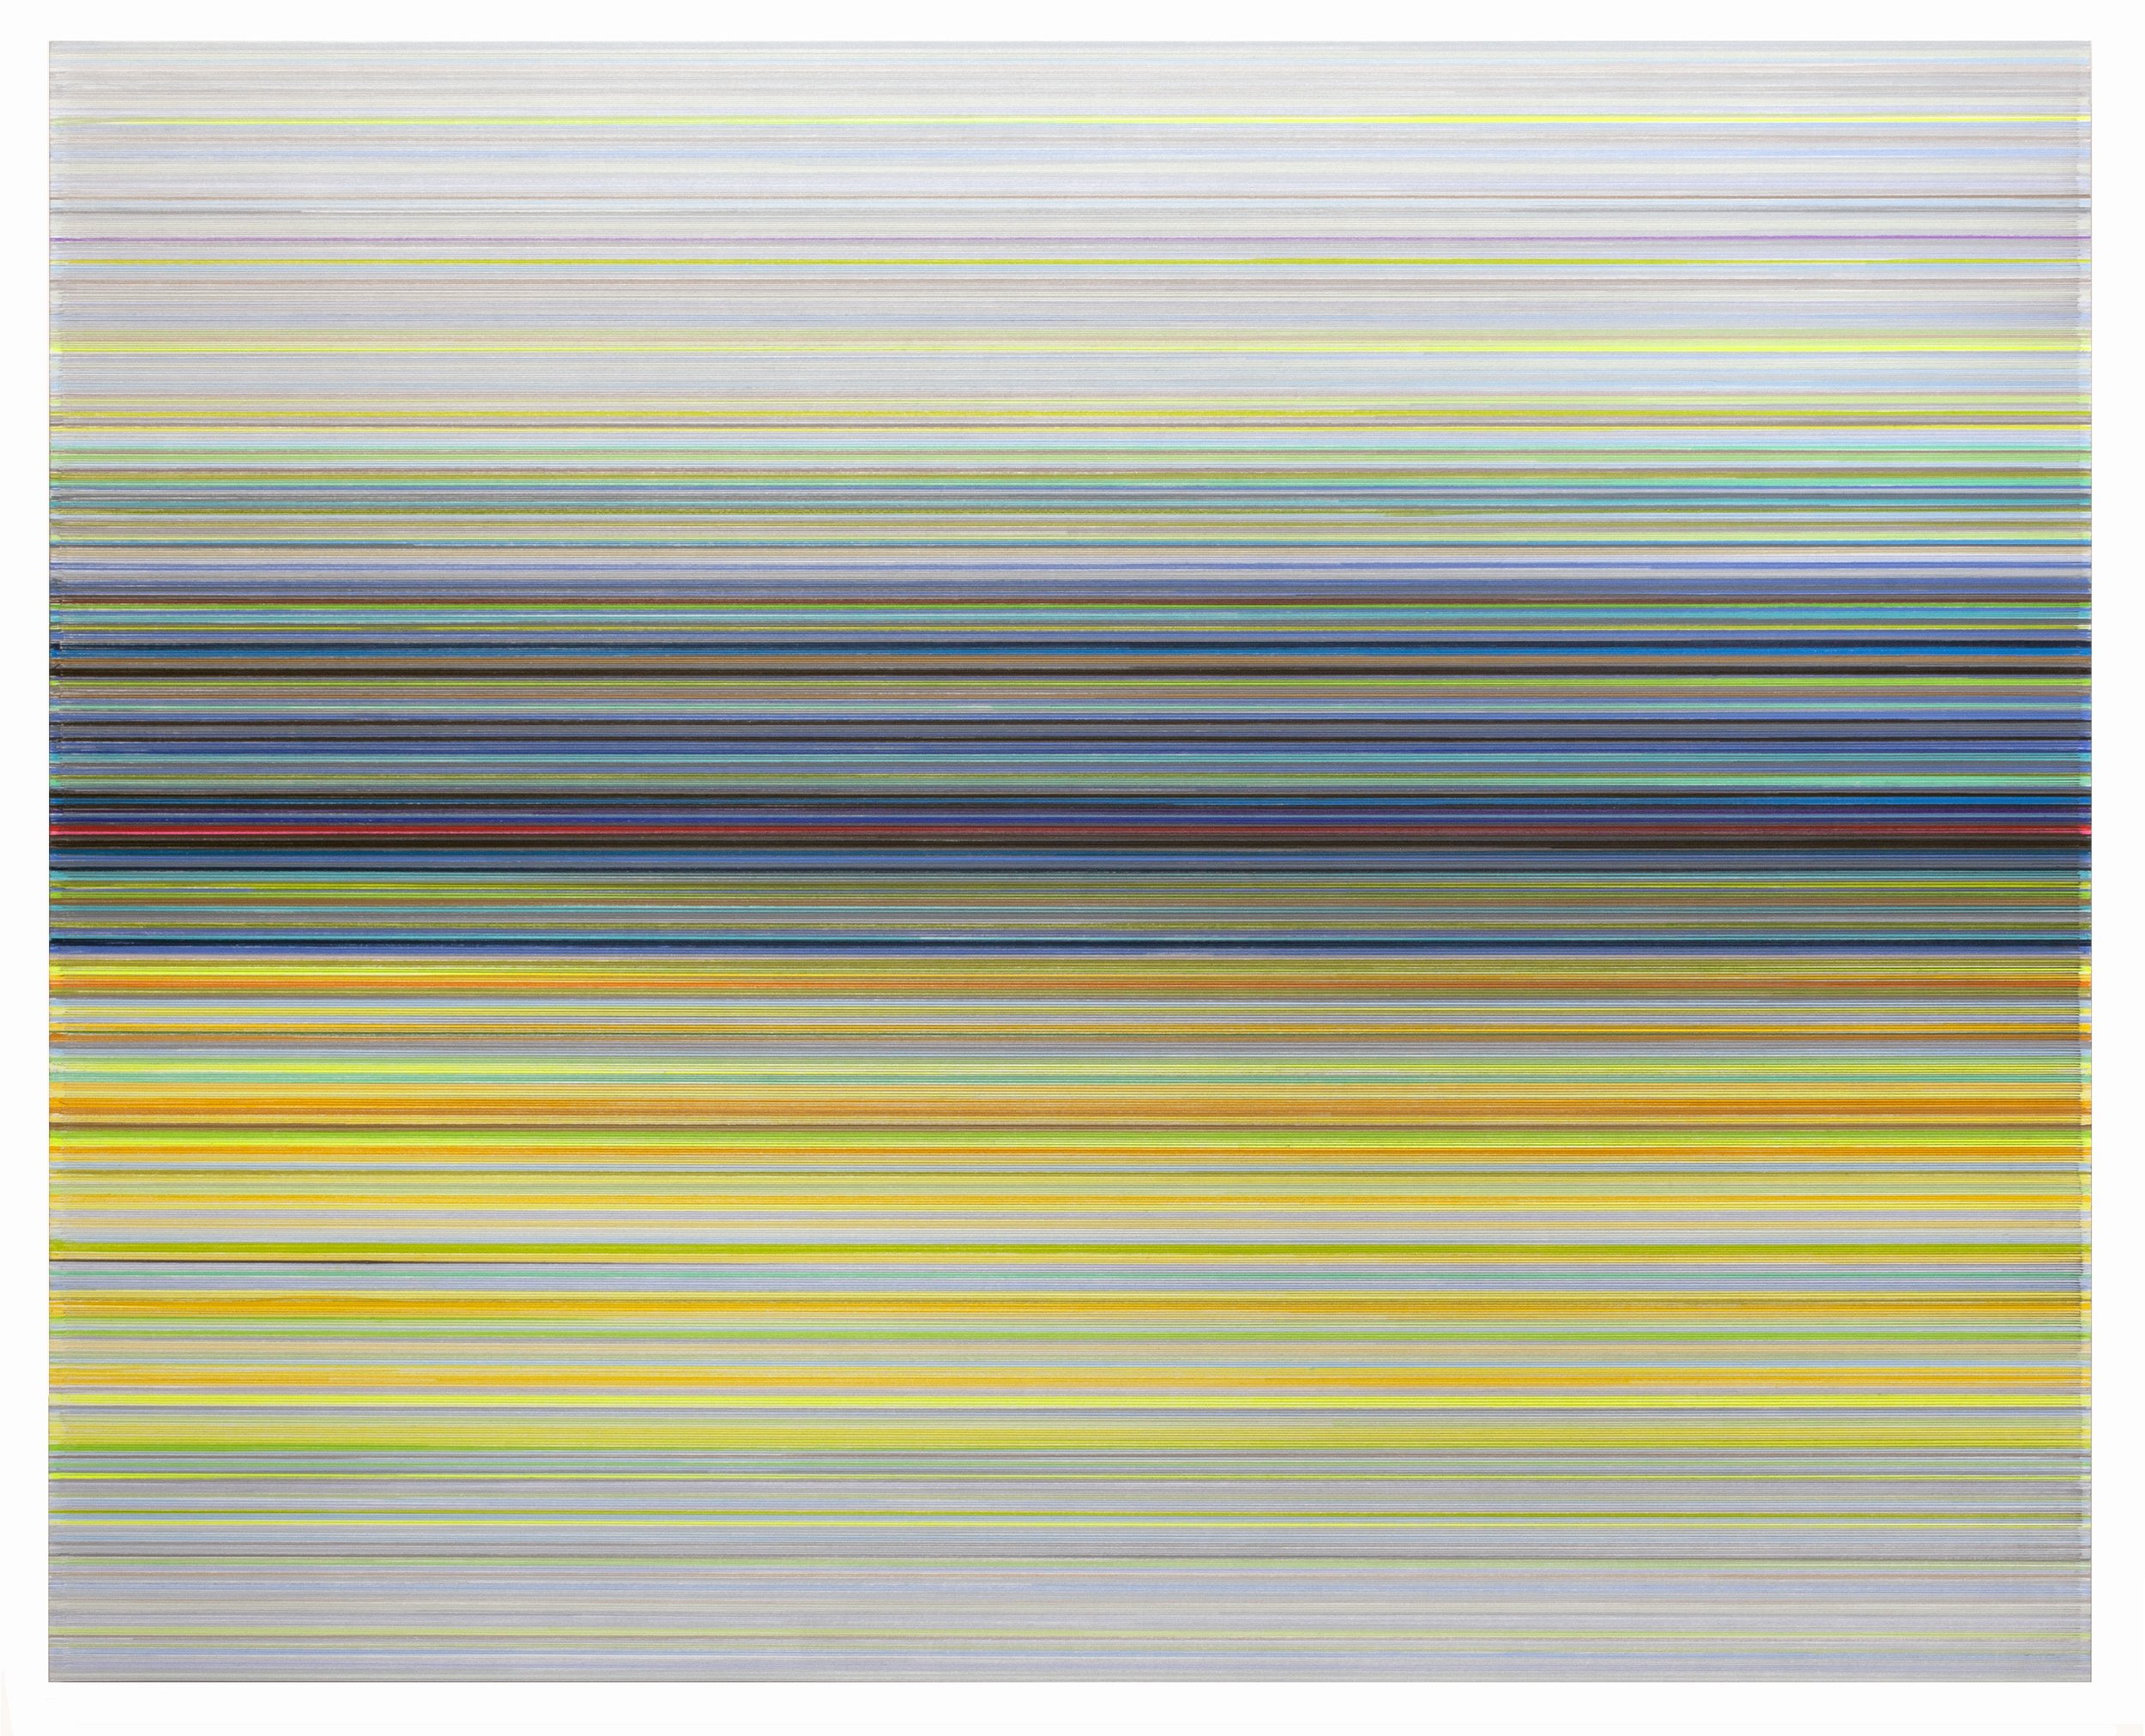    spectrum   2022 graphite and colored pencil on mat board 40 x 50 inches 